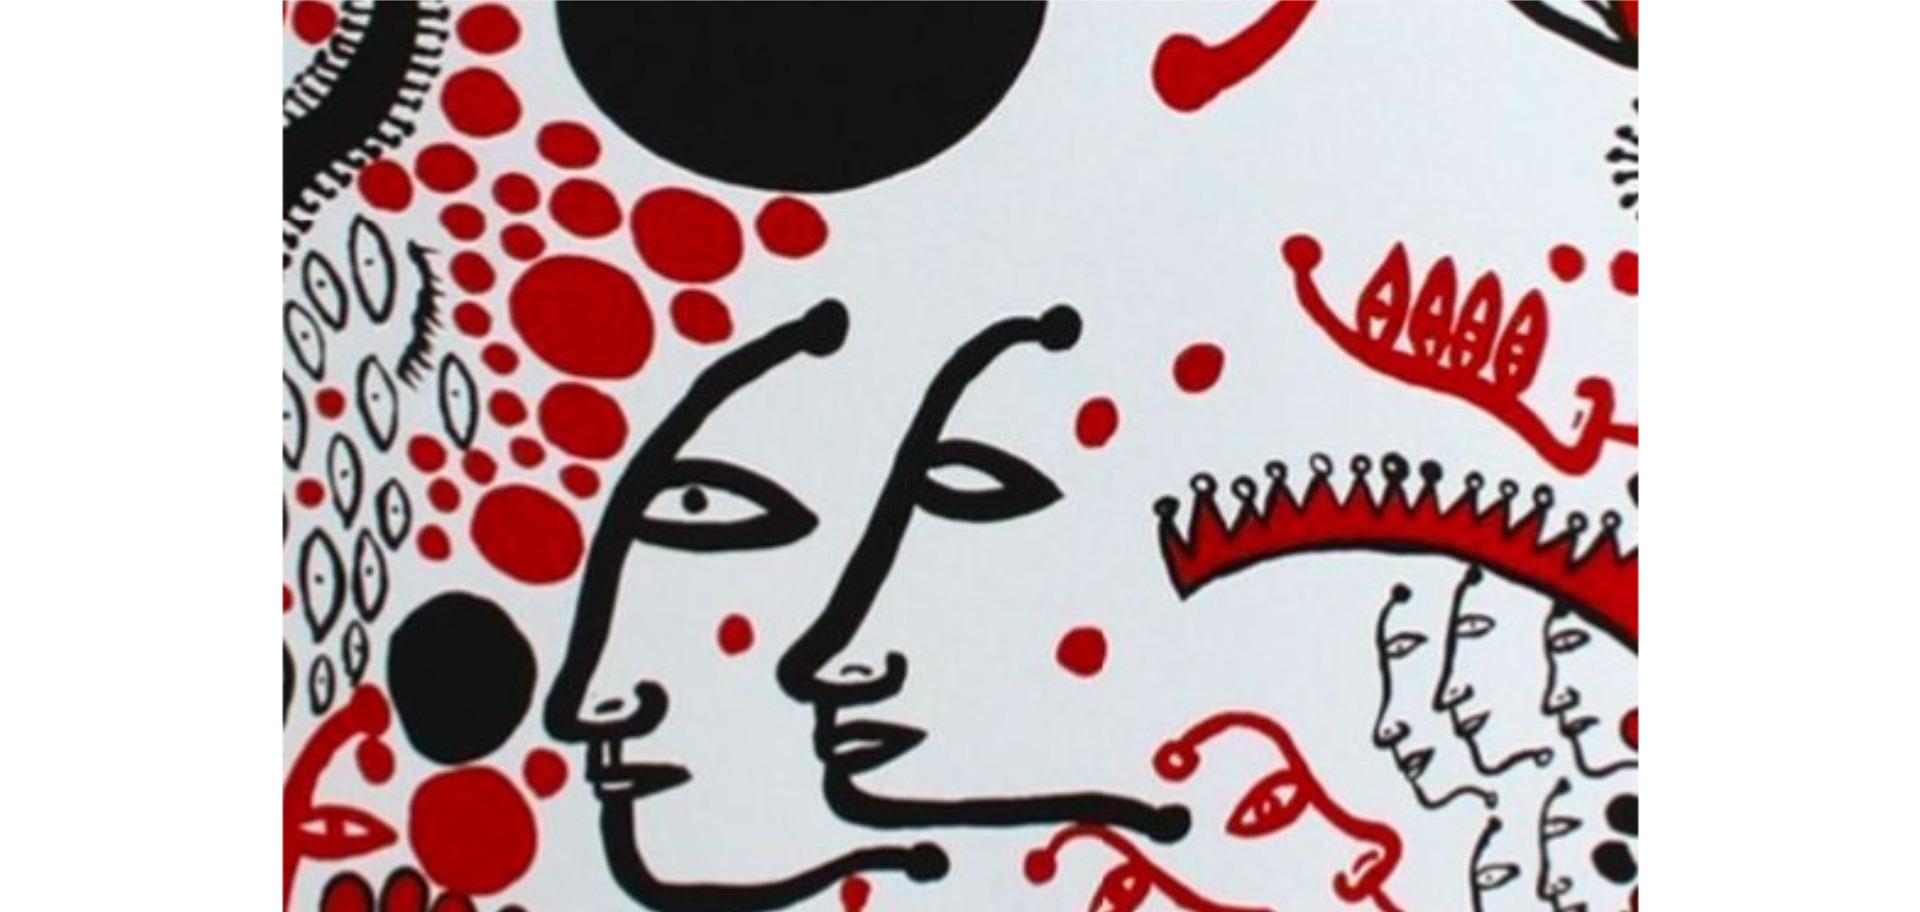 I Want To Sing My Heart Out In Praise of Life, Yayoi Kusama im Angebot 4